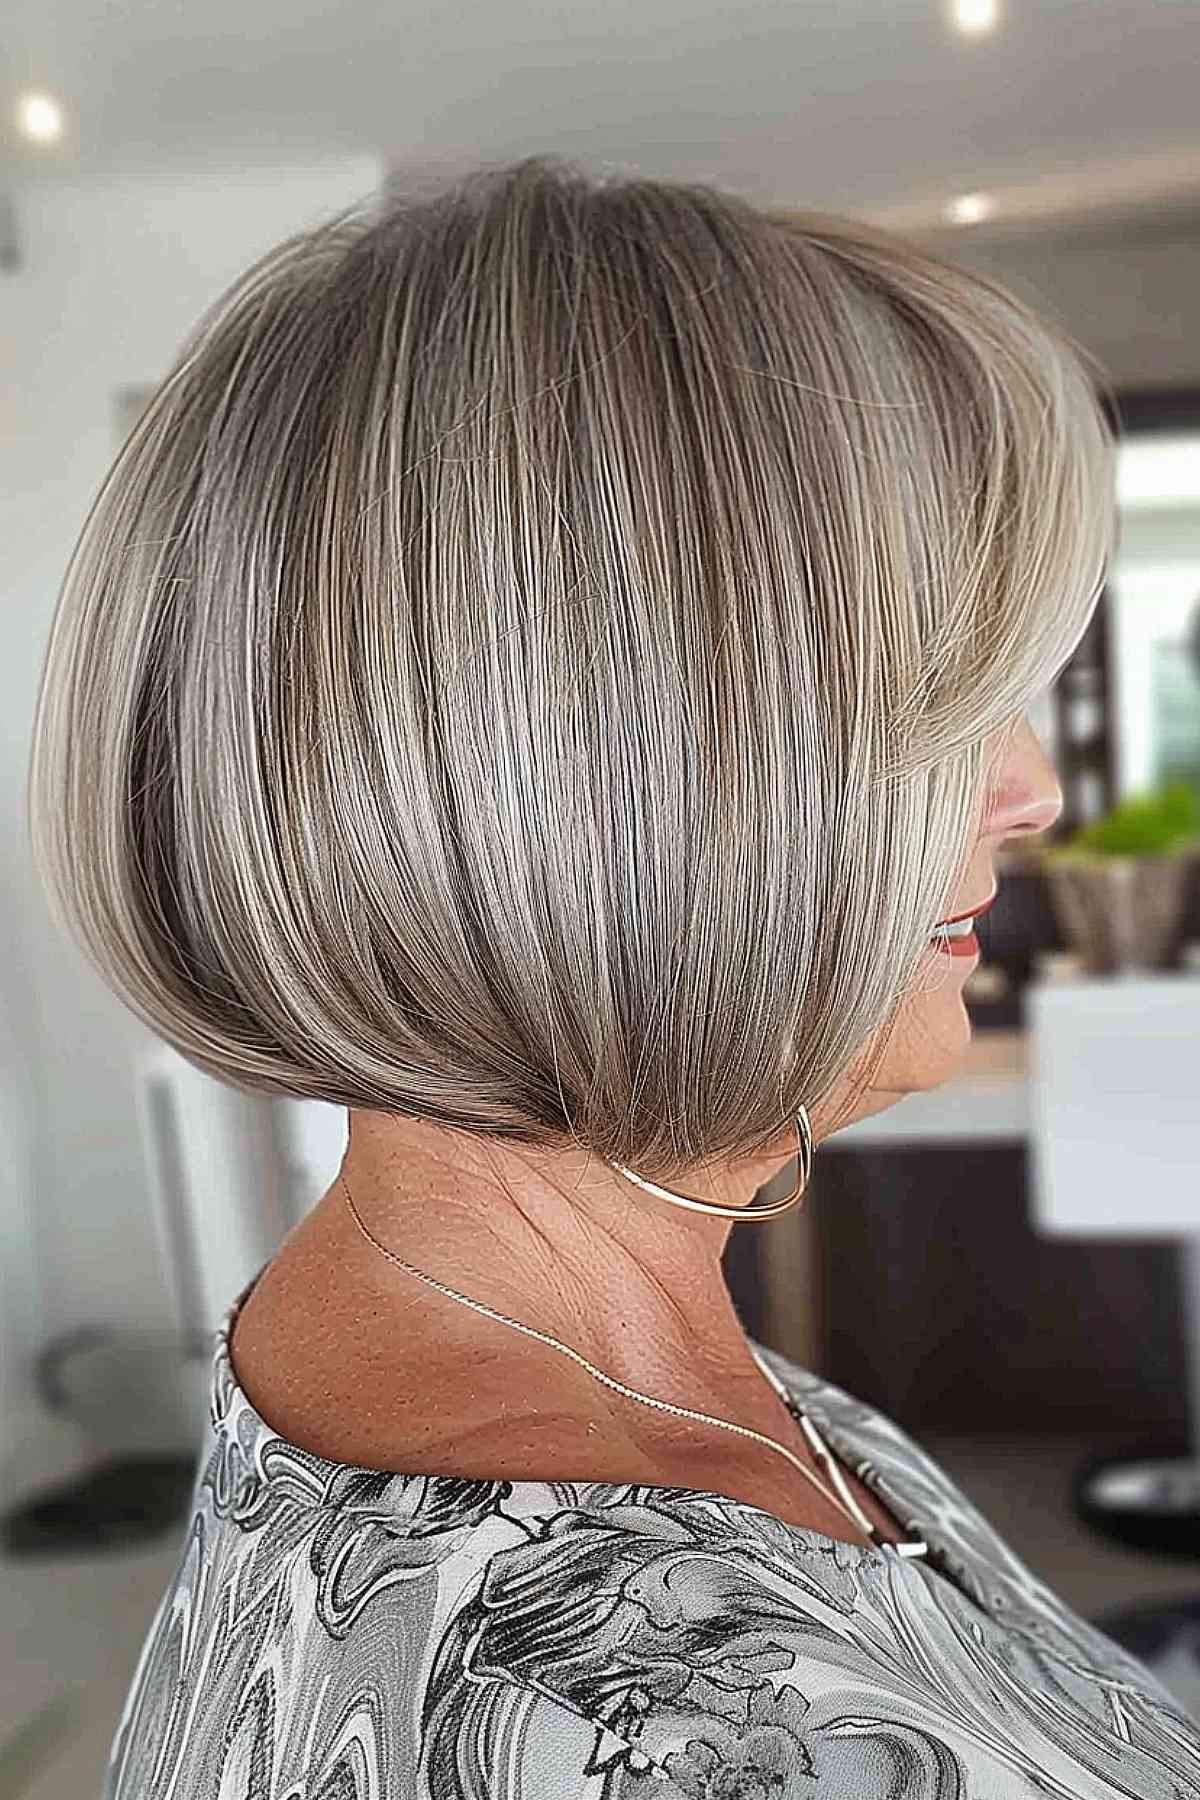 Rounded Bob Cut for women over 70